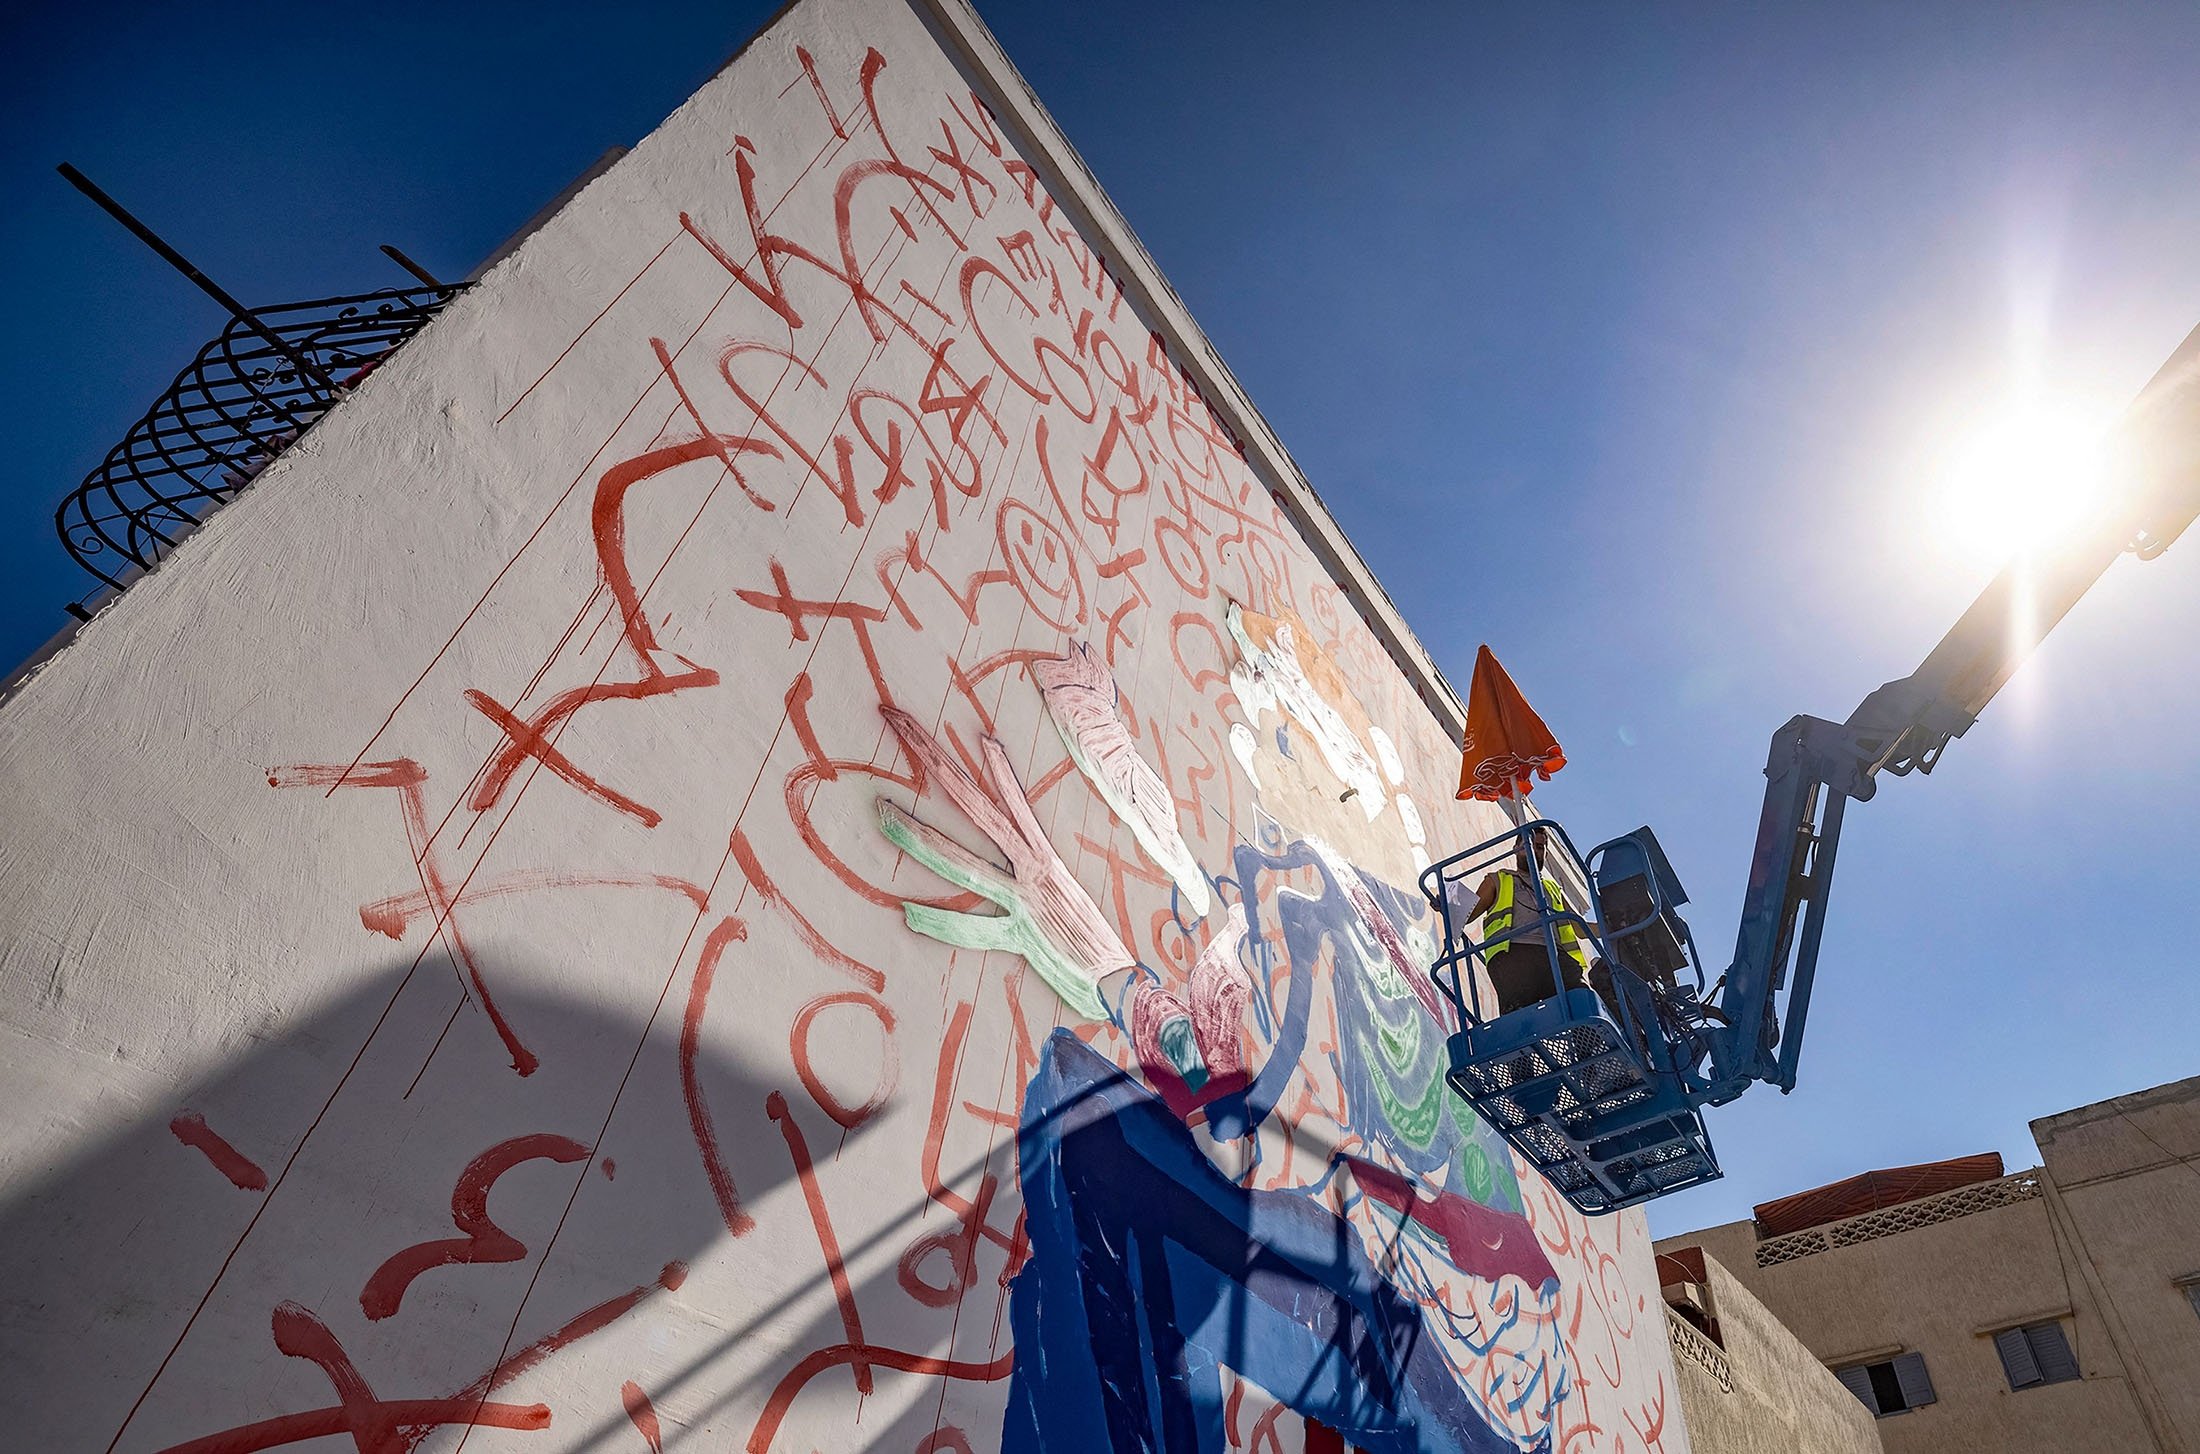 Moroccan street artist Omar Lhamzi works on a mural during the Jidar street art festival in the capital Rabat, Morocco, Sept. 20, 2021. (AFP Photo)